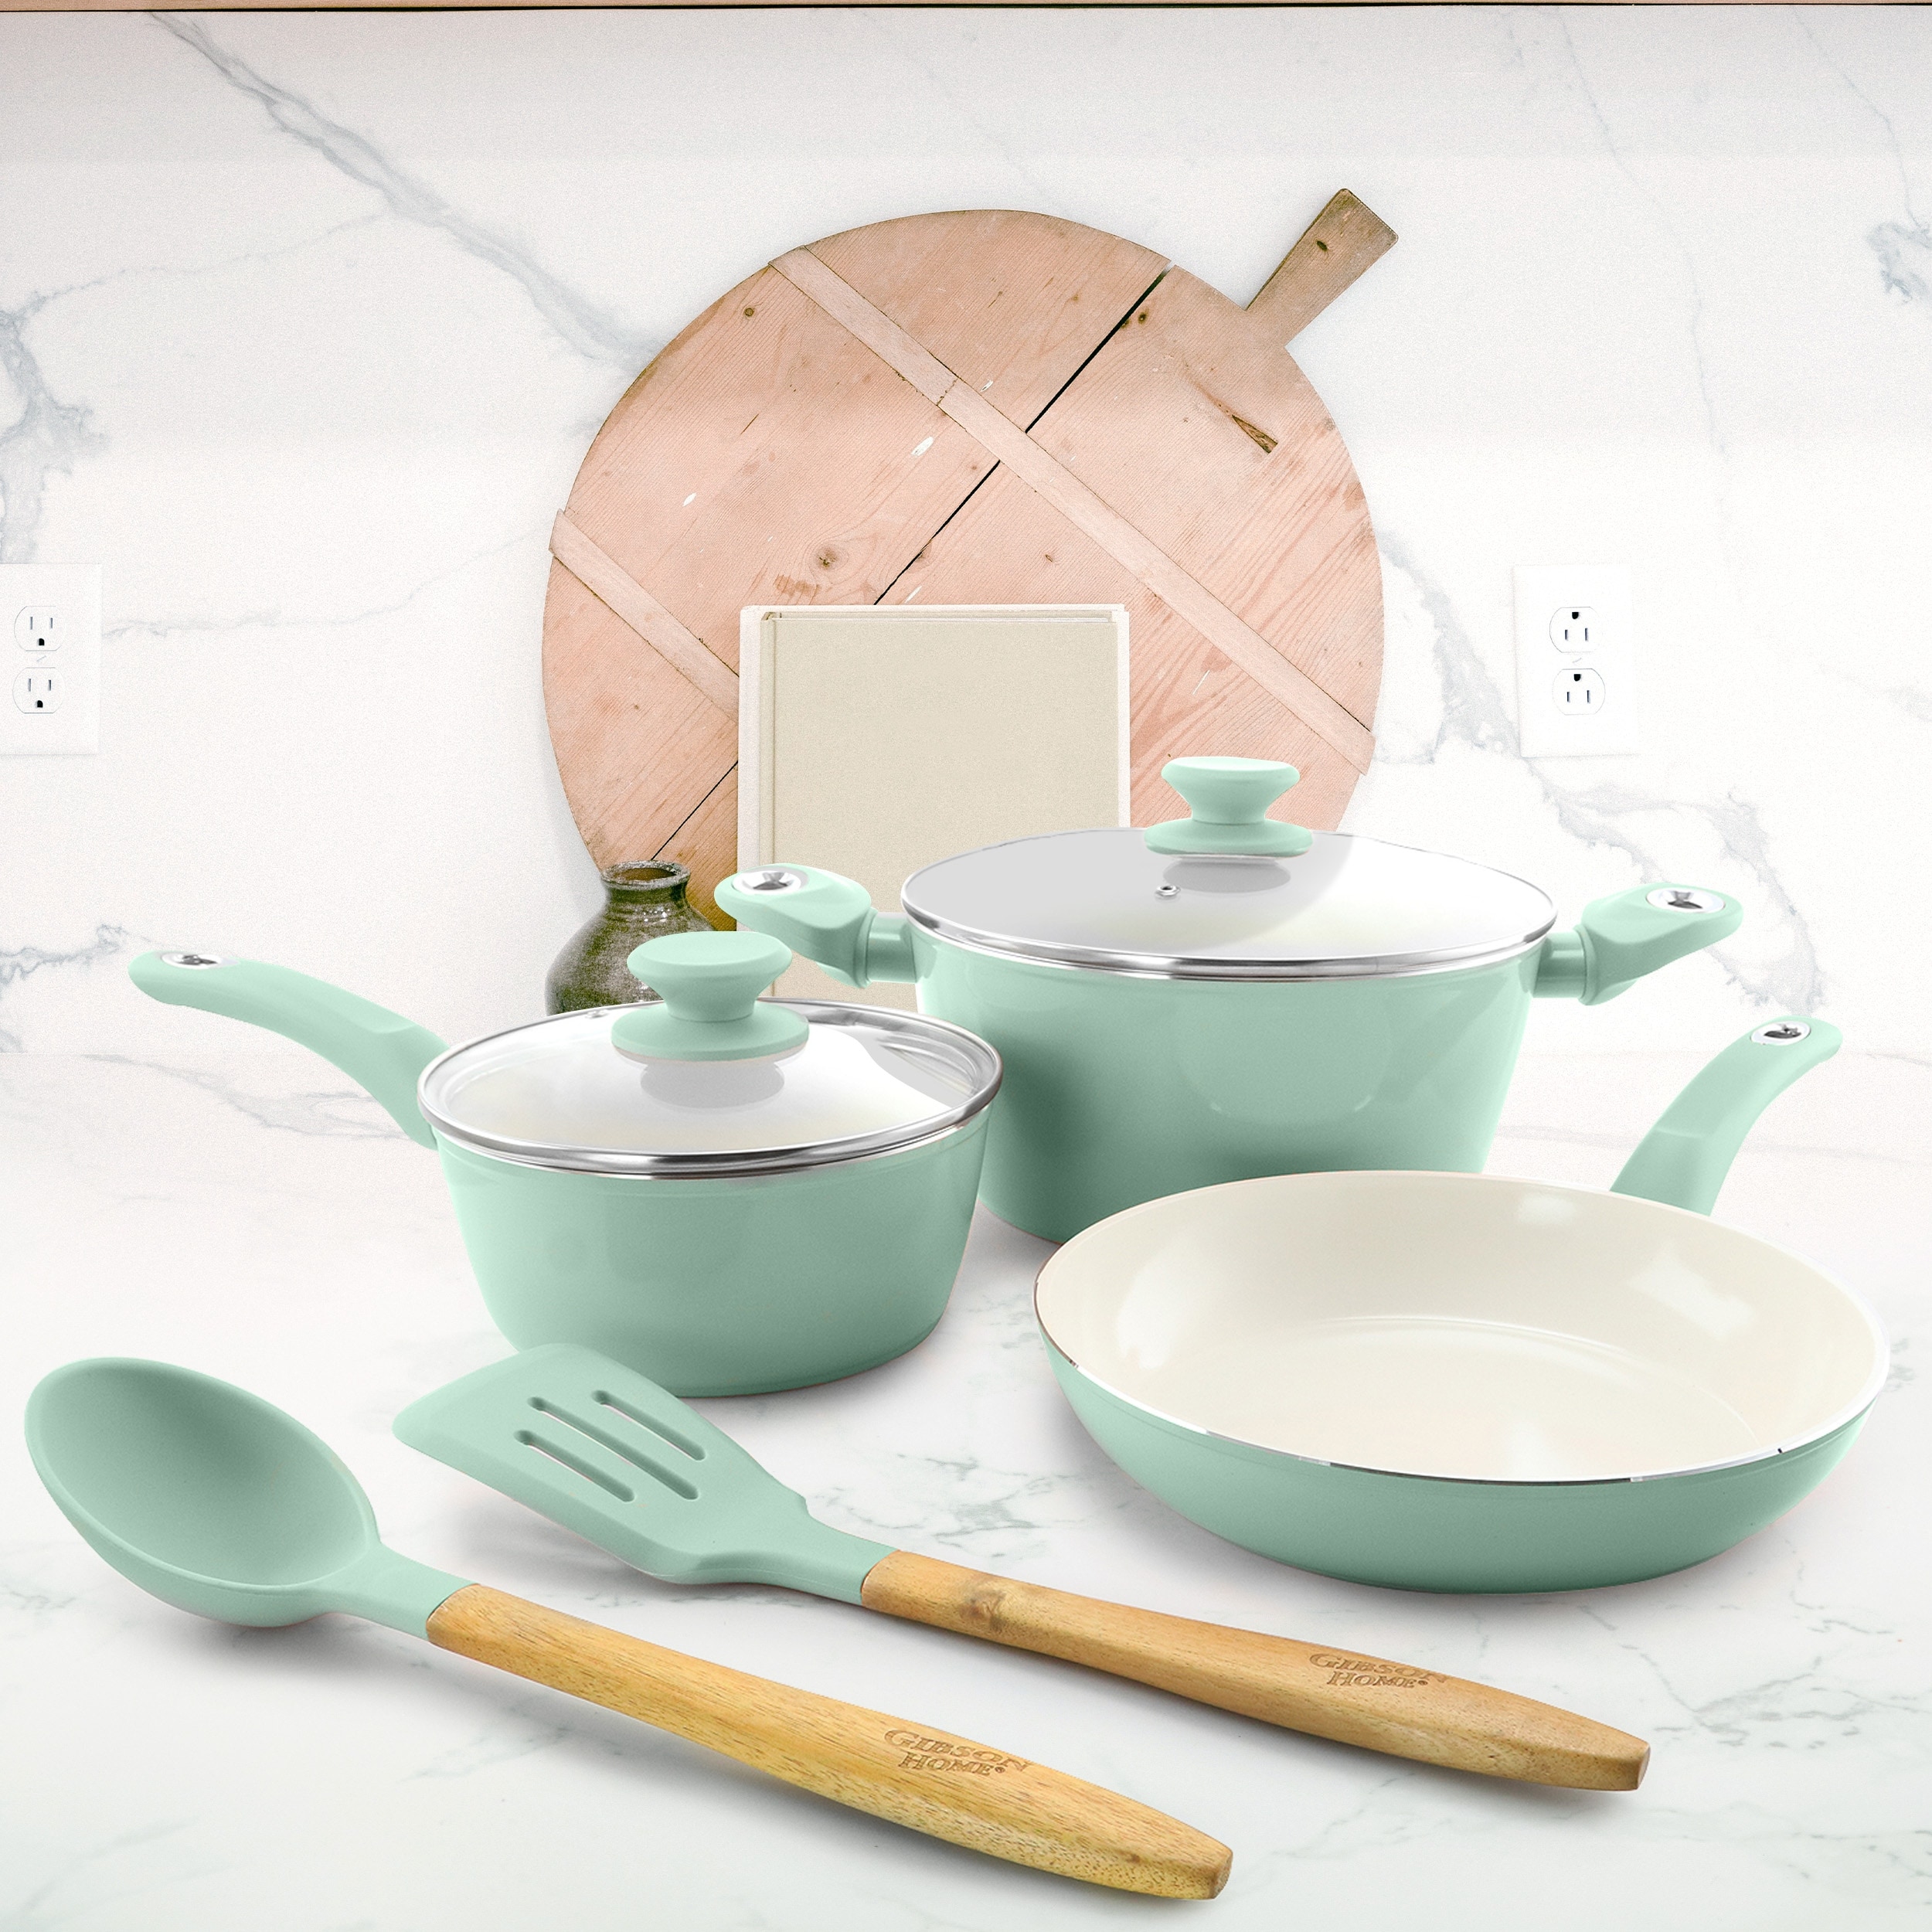 https://ak1.ostkcdn.com/images/products/is/images/direct/6aa27401a643eb91c43922123d91198175e37916/7-Piece-Cookware-Set-in-Aqua.jpg